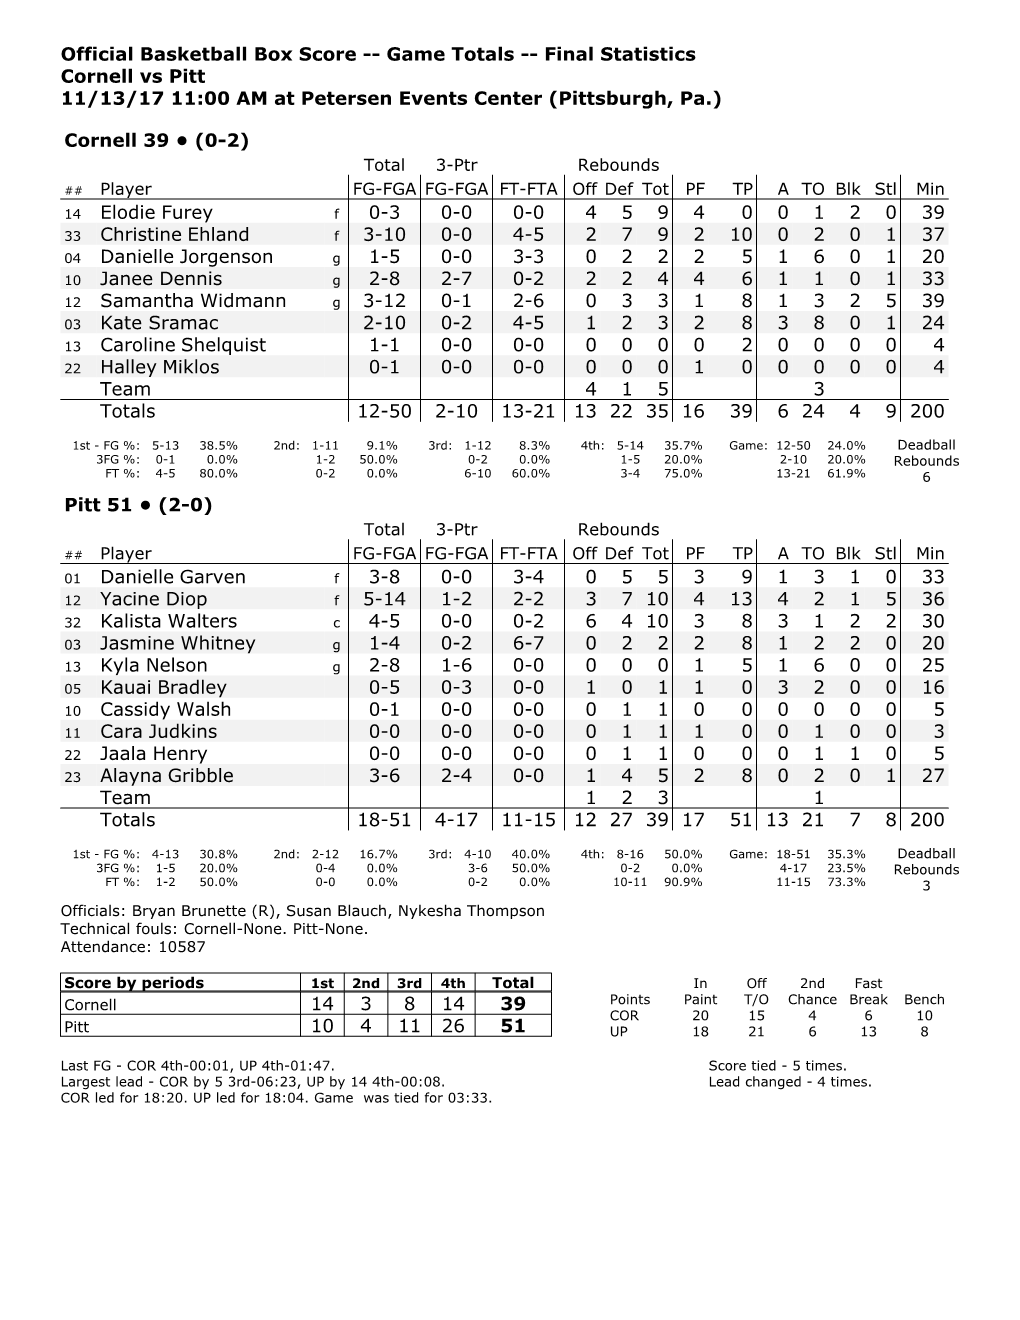 Official Basketball Box Score -- Game Totals -- Final Statistics Cornell Vs Pitt 11/13/17 11:00 AM at Petersen Events Center (Pittsburgh, Pa.)